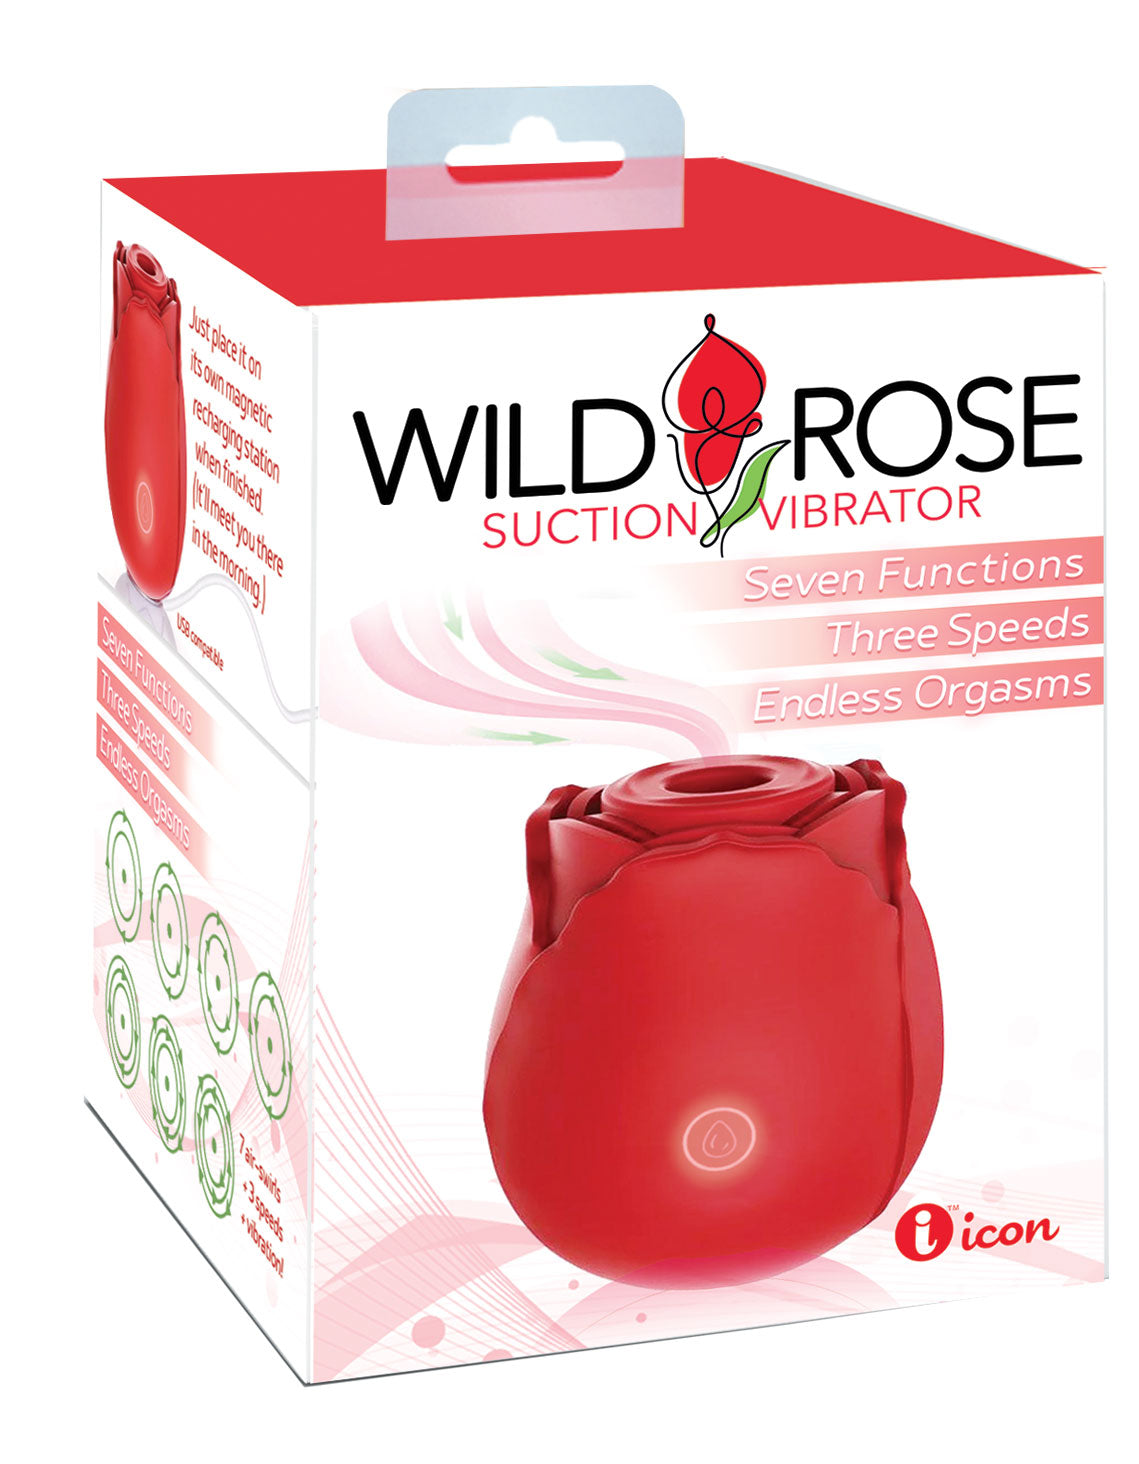 Wild Rose Suction Vibrator - Red IC1700